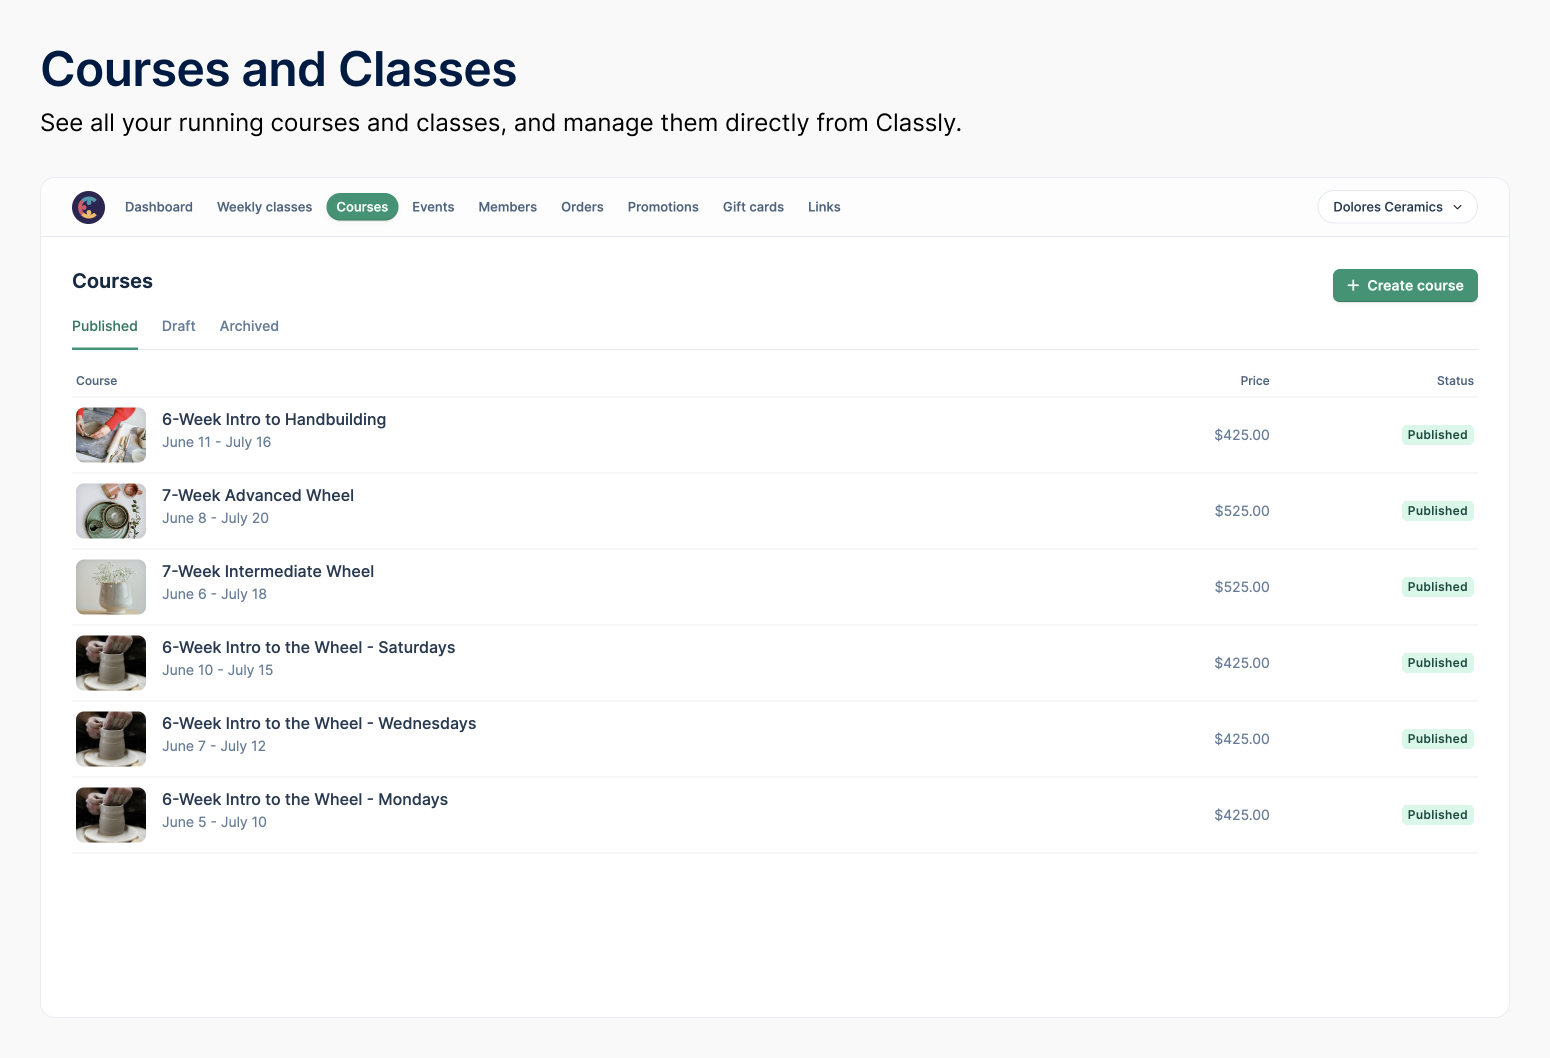 In the Classes and Courses tab, see all your running courses and classes and manage them directly from Classly.